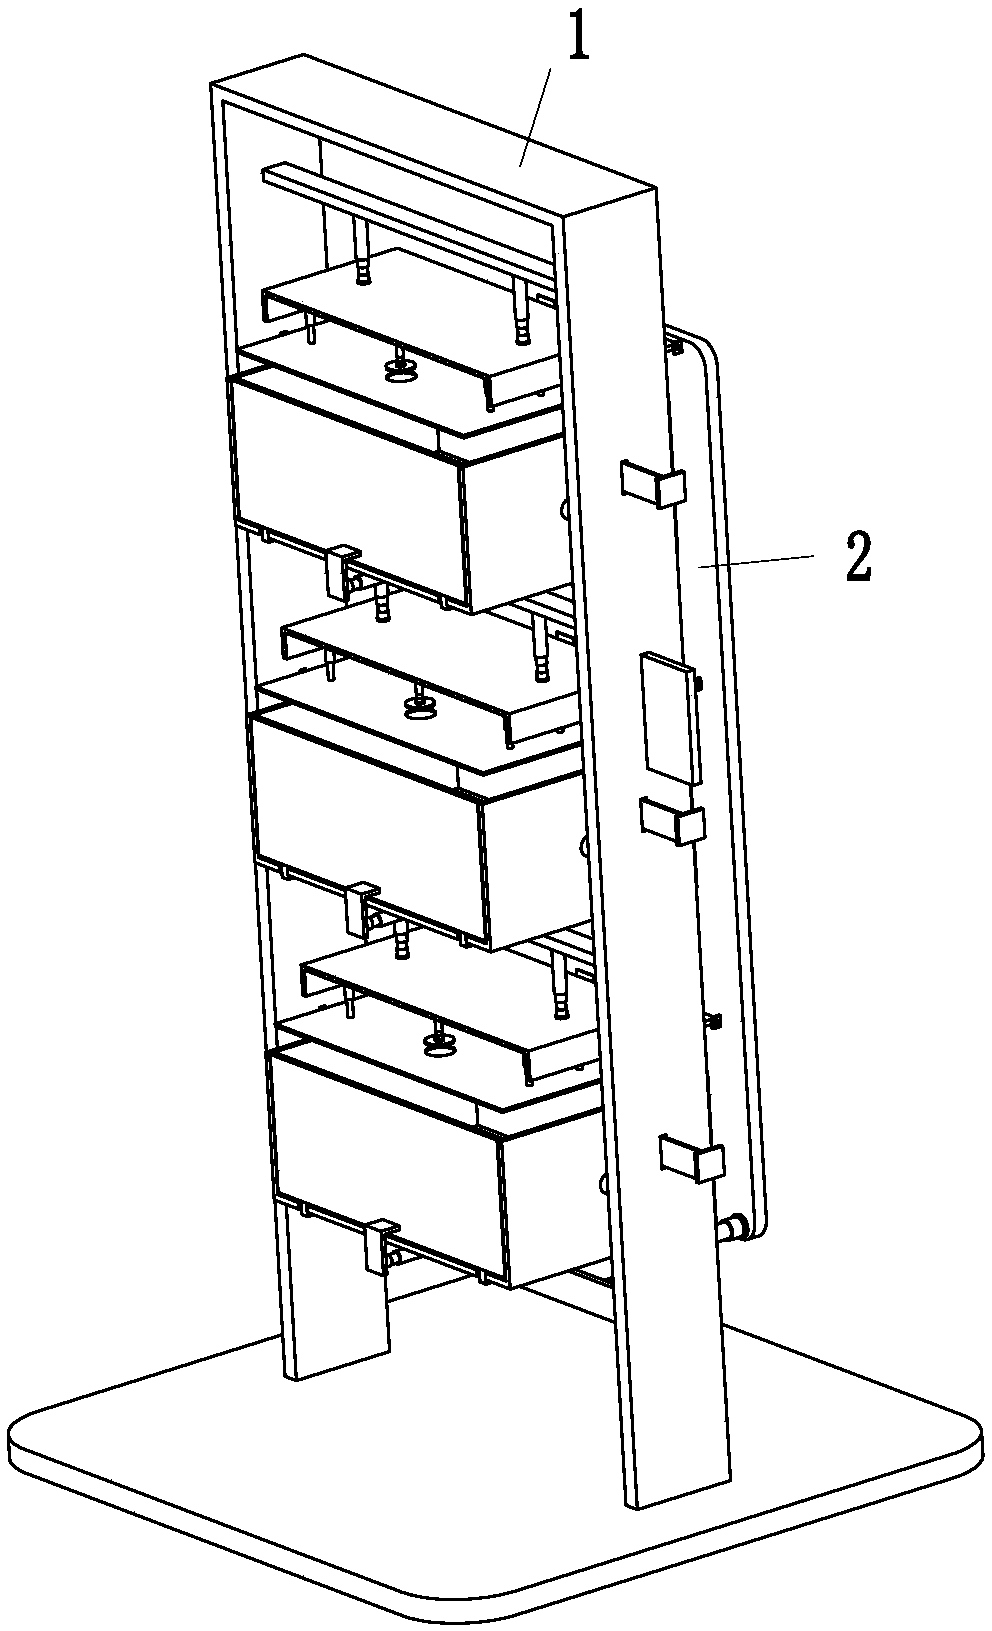 Extruded food manufacturing and processing equipment, as well as extruded food manufacturing and processing method